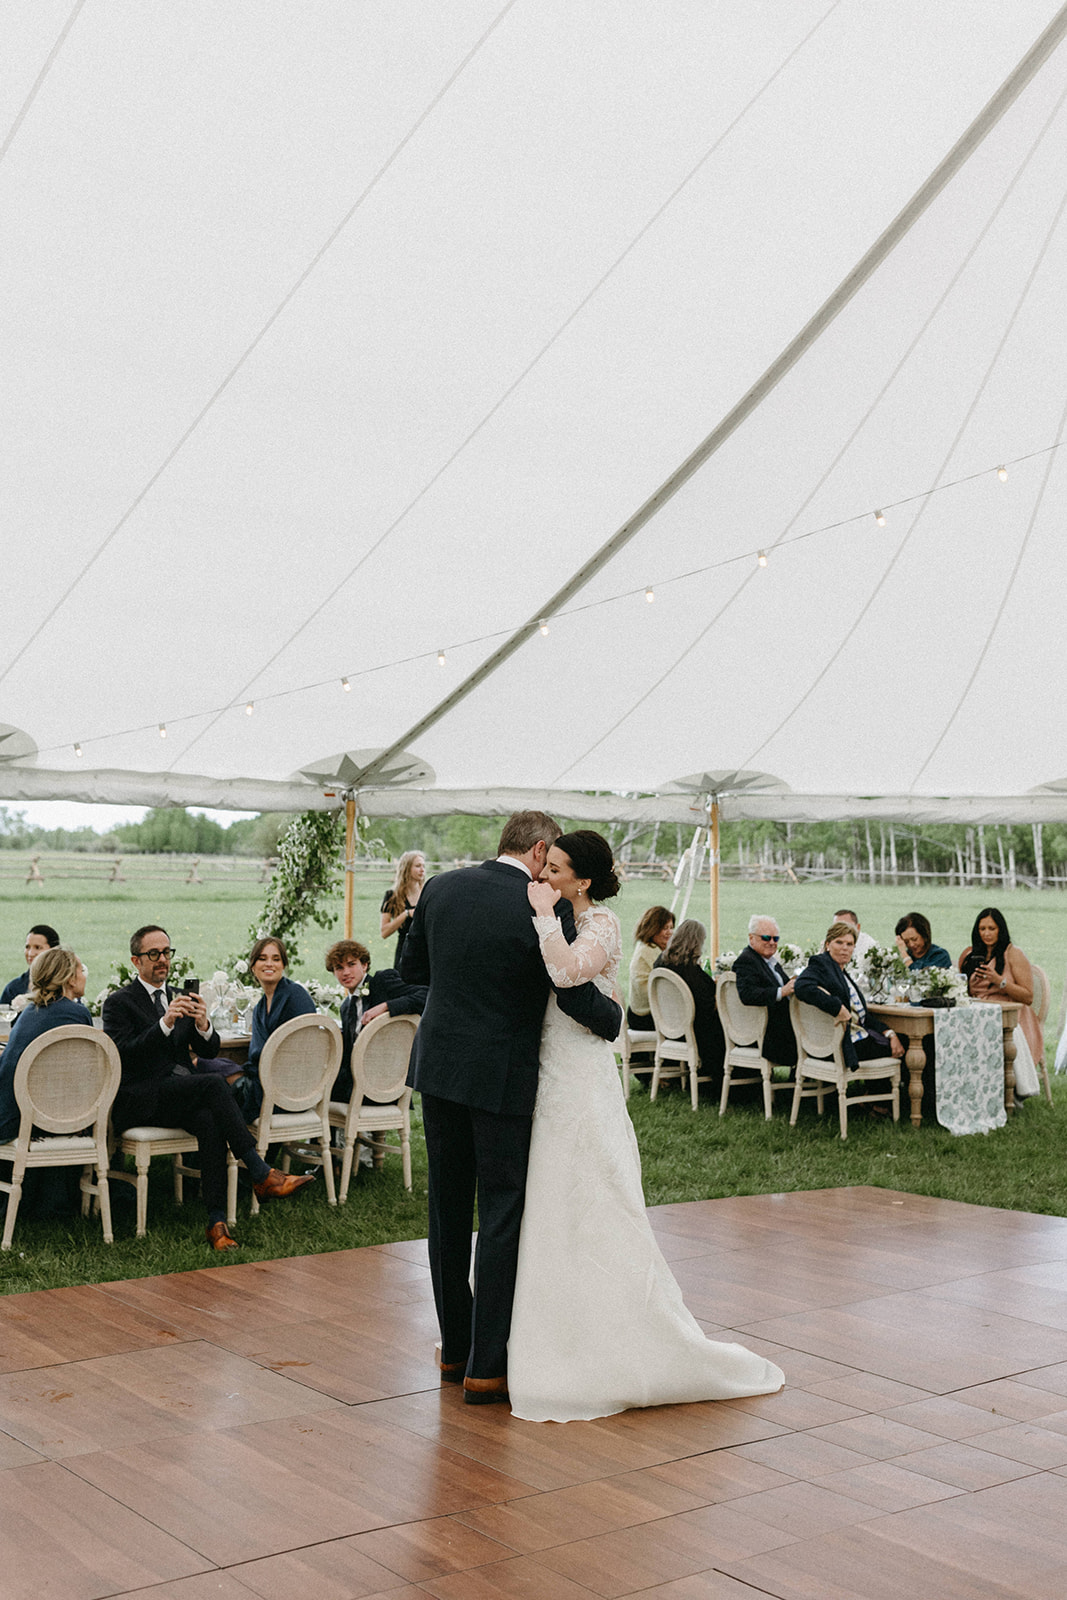 A man in a black tailored suit dances with his wife during an outdoor wedding reception in a white tent. 